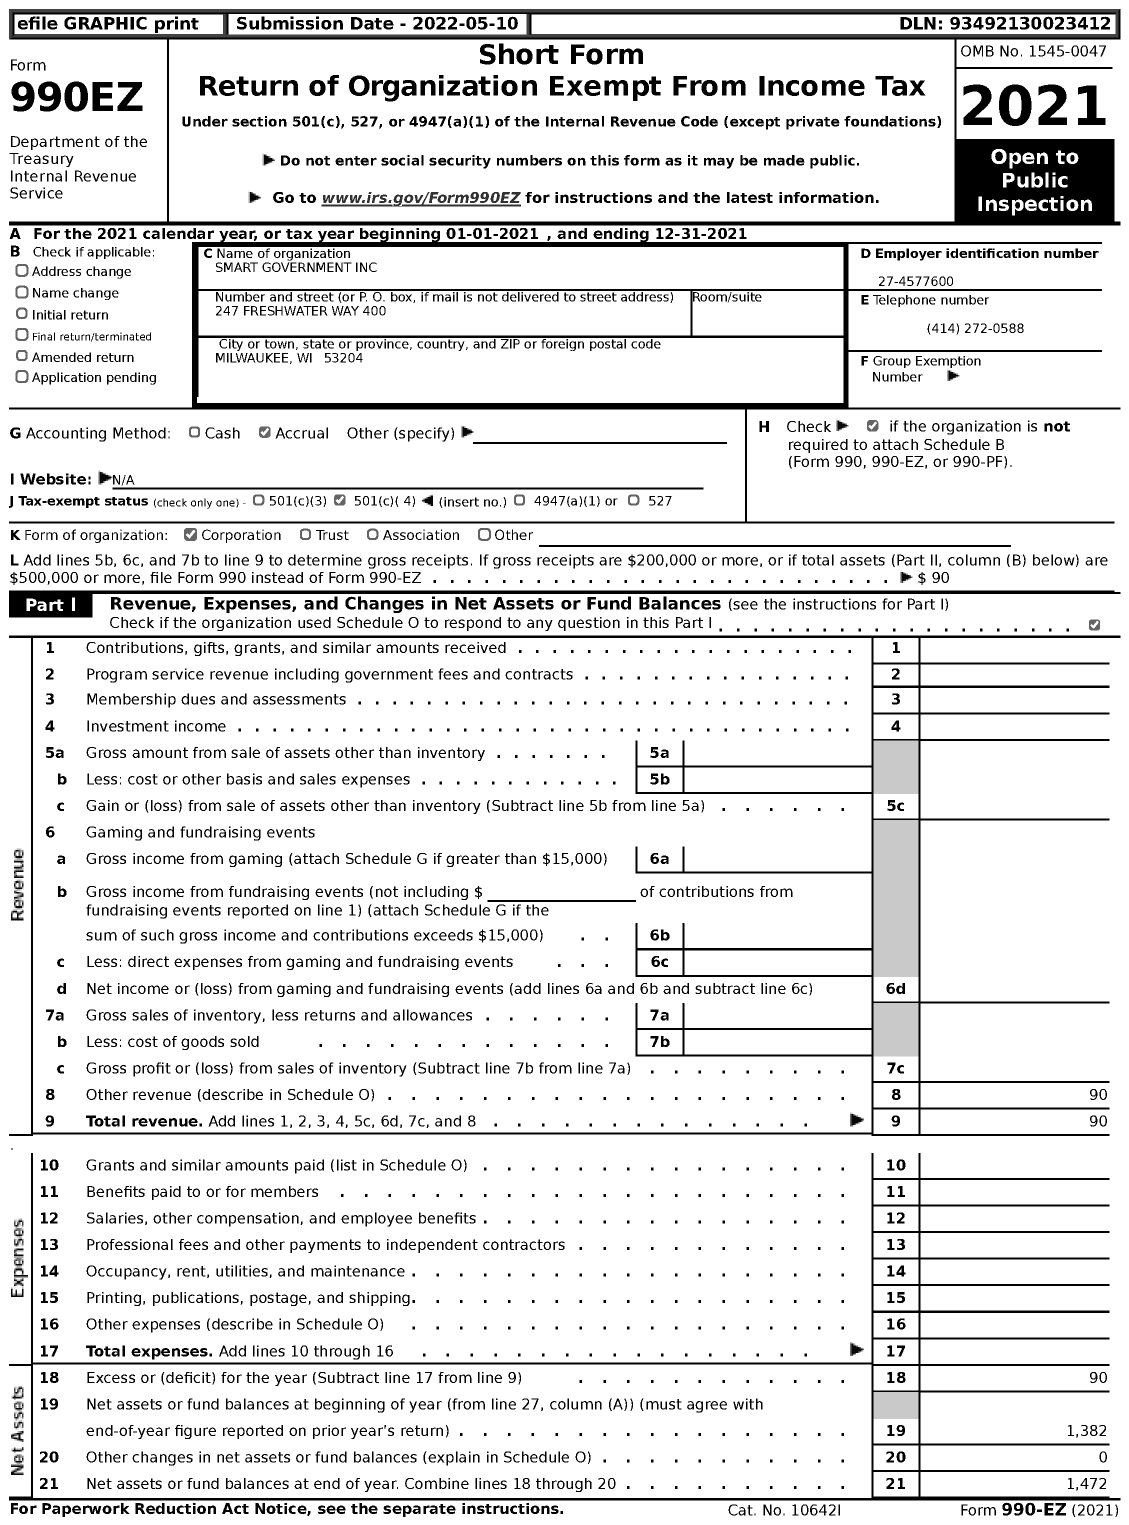 Image of first page of 2021 Form 990EZ for Smart Government